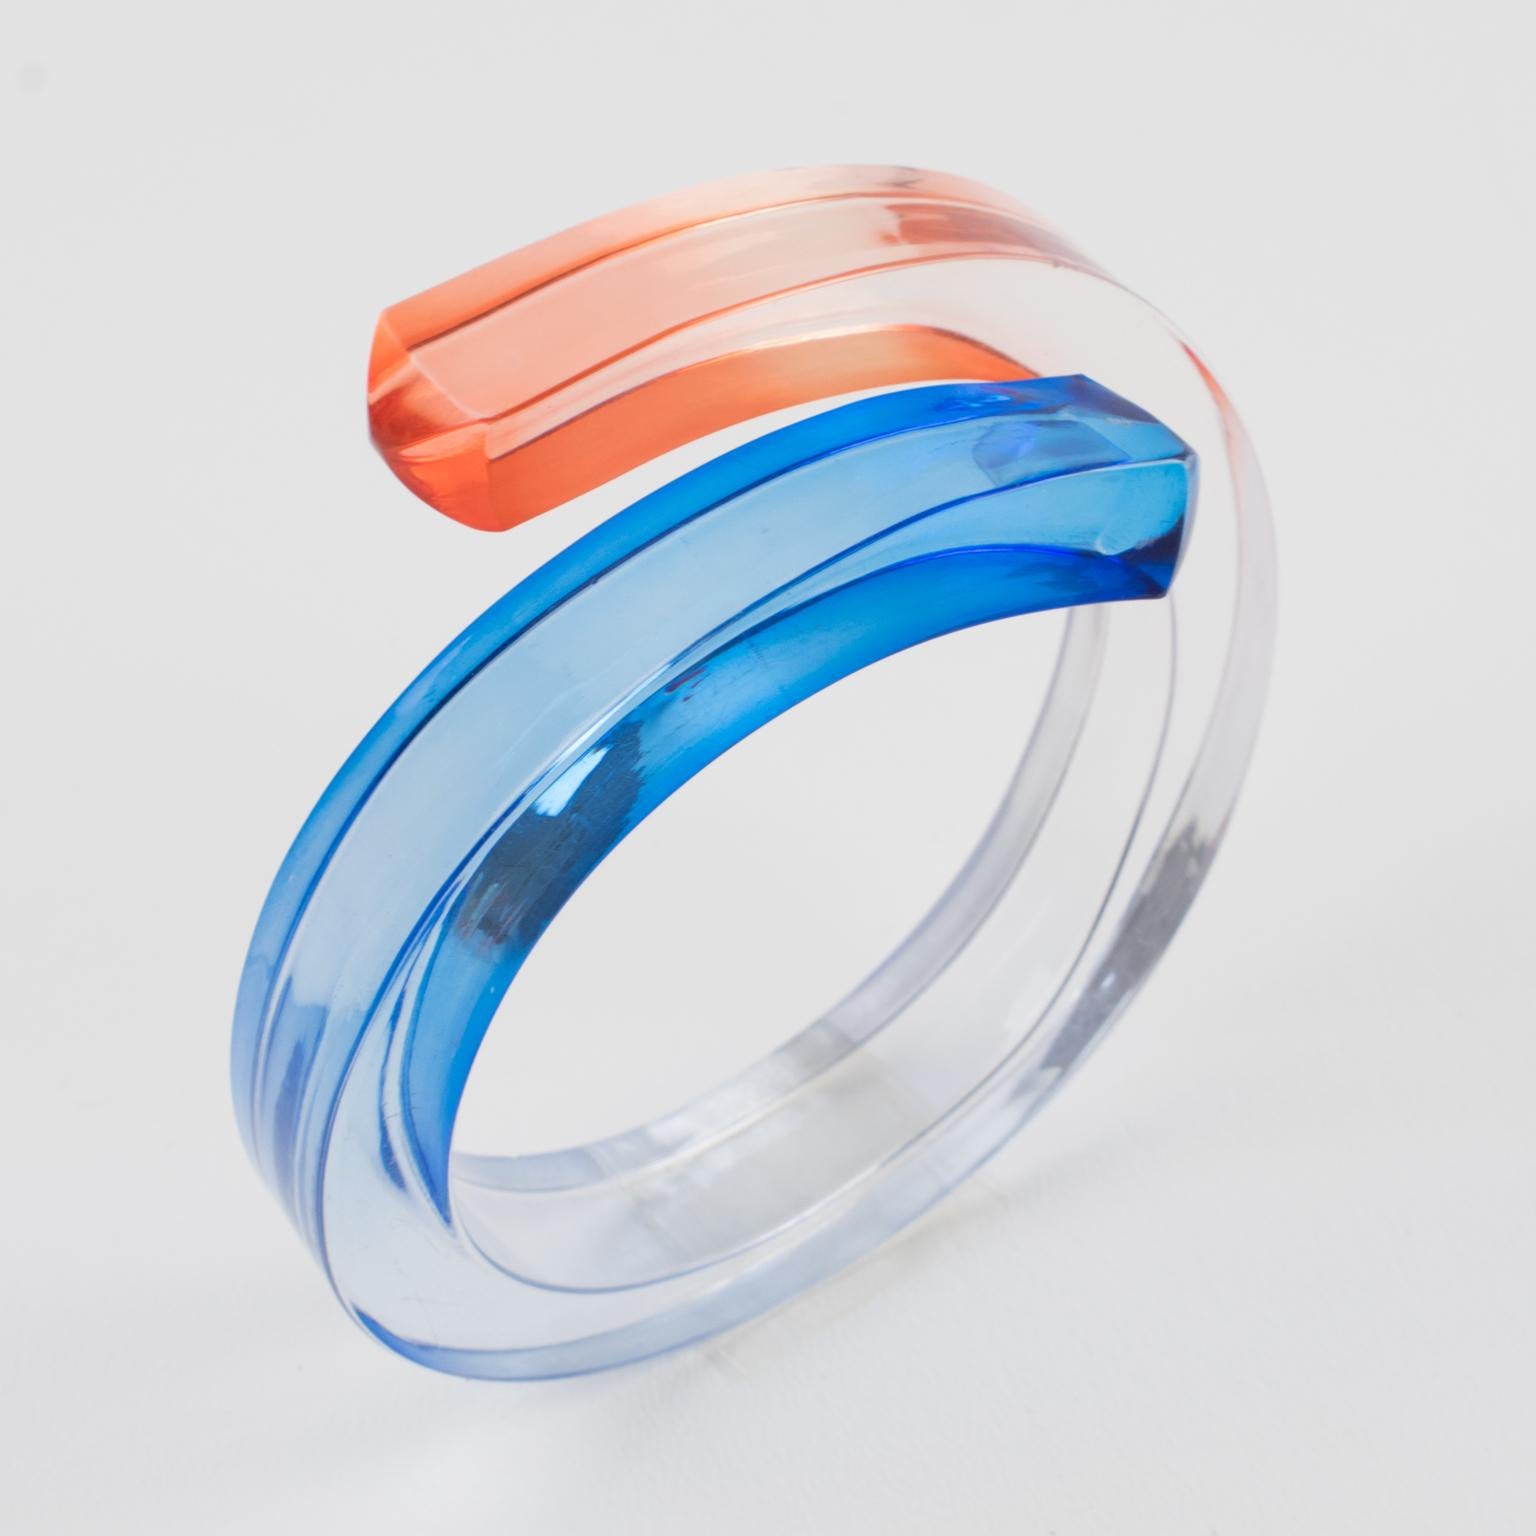 Oversized Pink and Blue Lucite Coiled Bangle Bracelet In Good Condition For Sale In Atlanta, GA